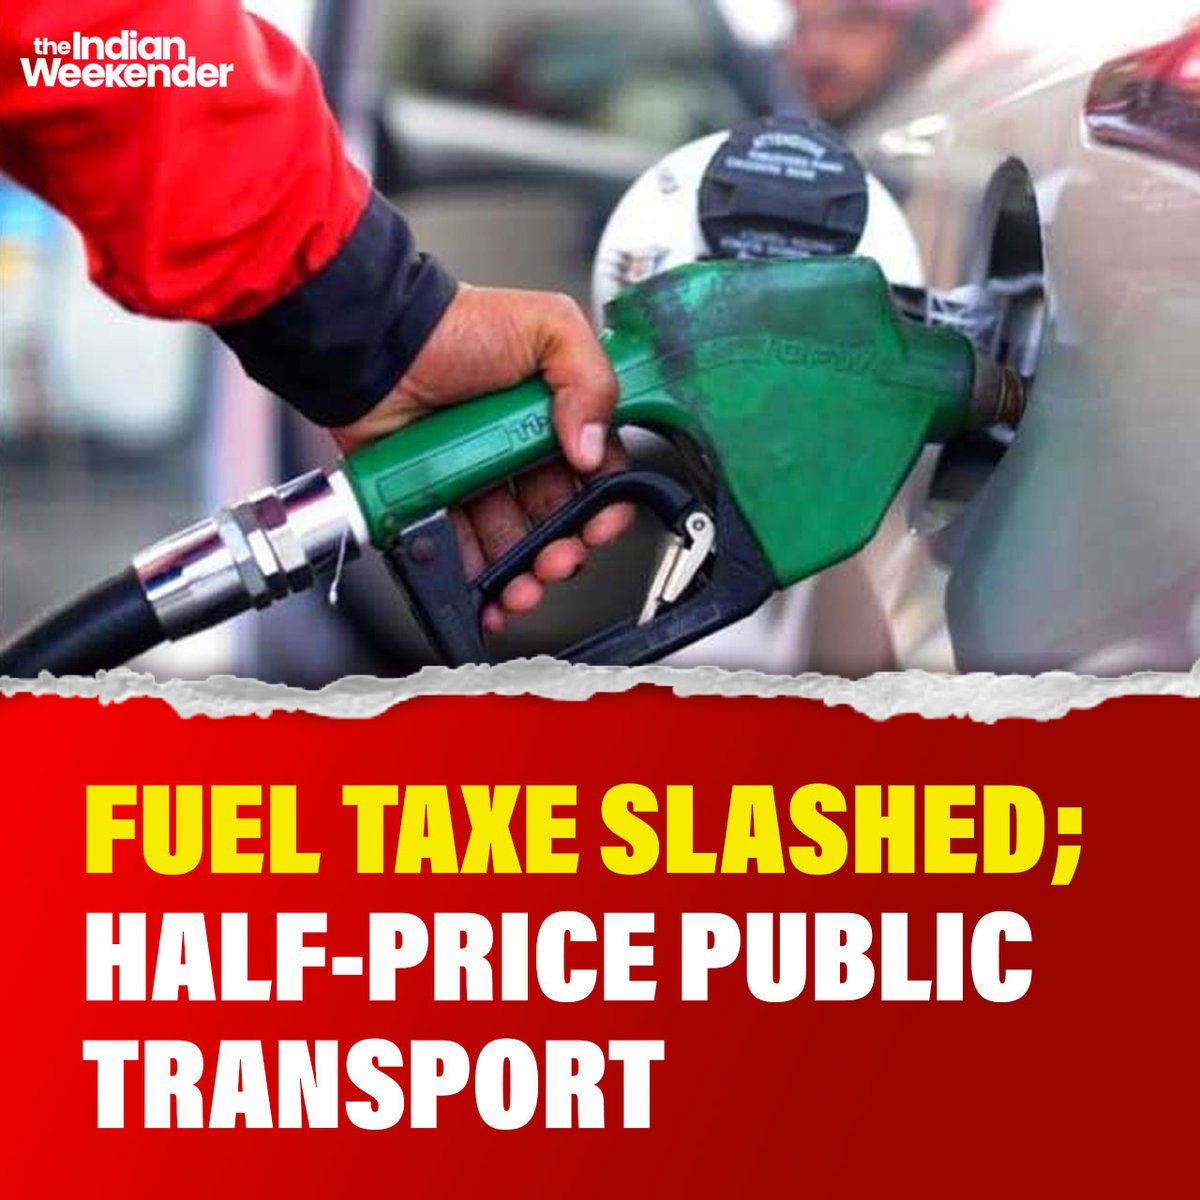 To give public respite from rising costs, the government has slashed fuel tax and also halved public transport fares for the next three months. Read more buff.ly/36lmrve
Tell us in the comments what do you think about these measures?
#Risingcost #inflation #FuelPrice #IWK